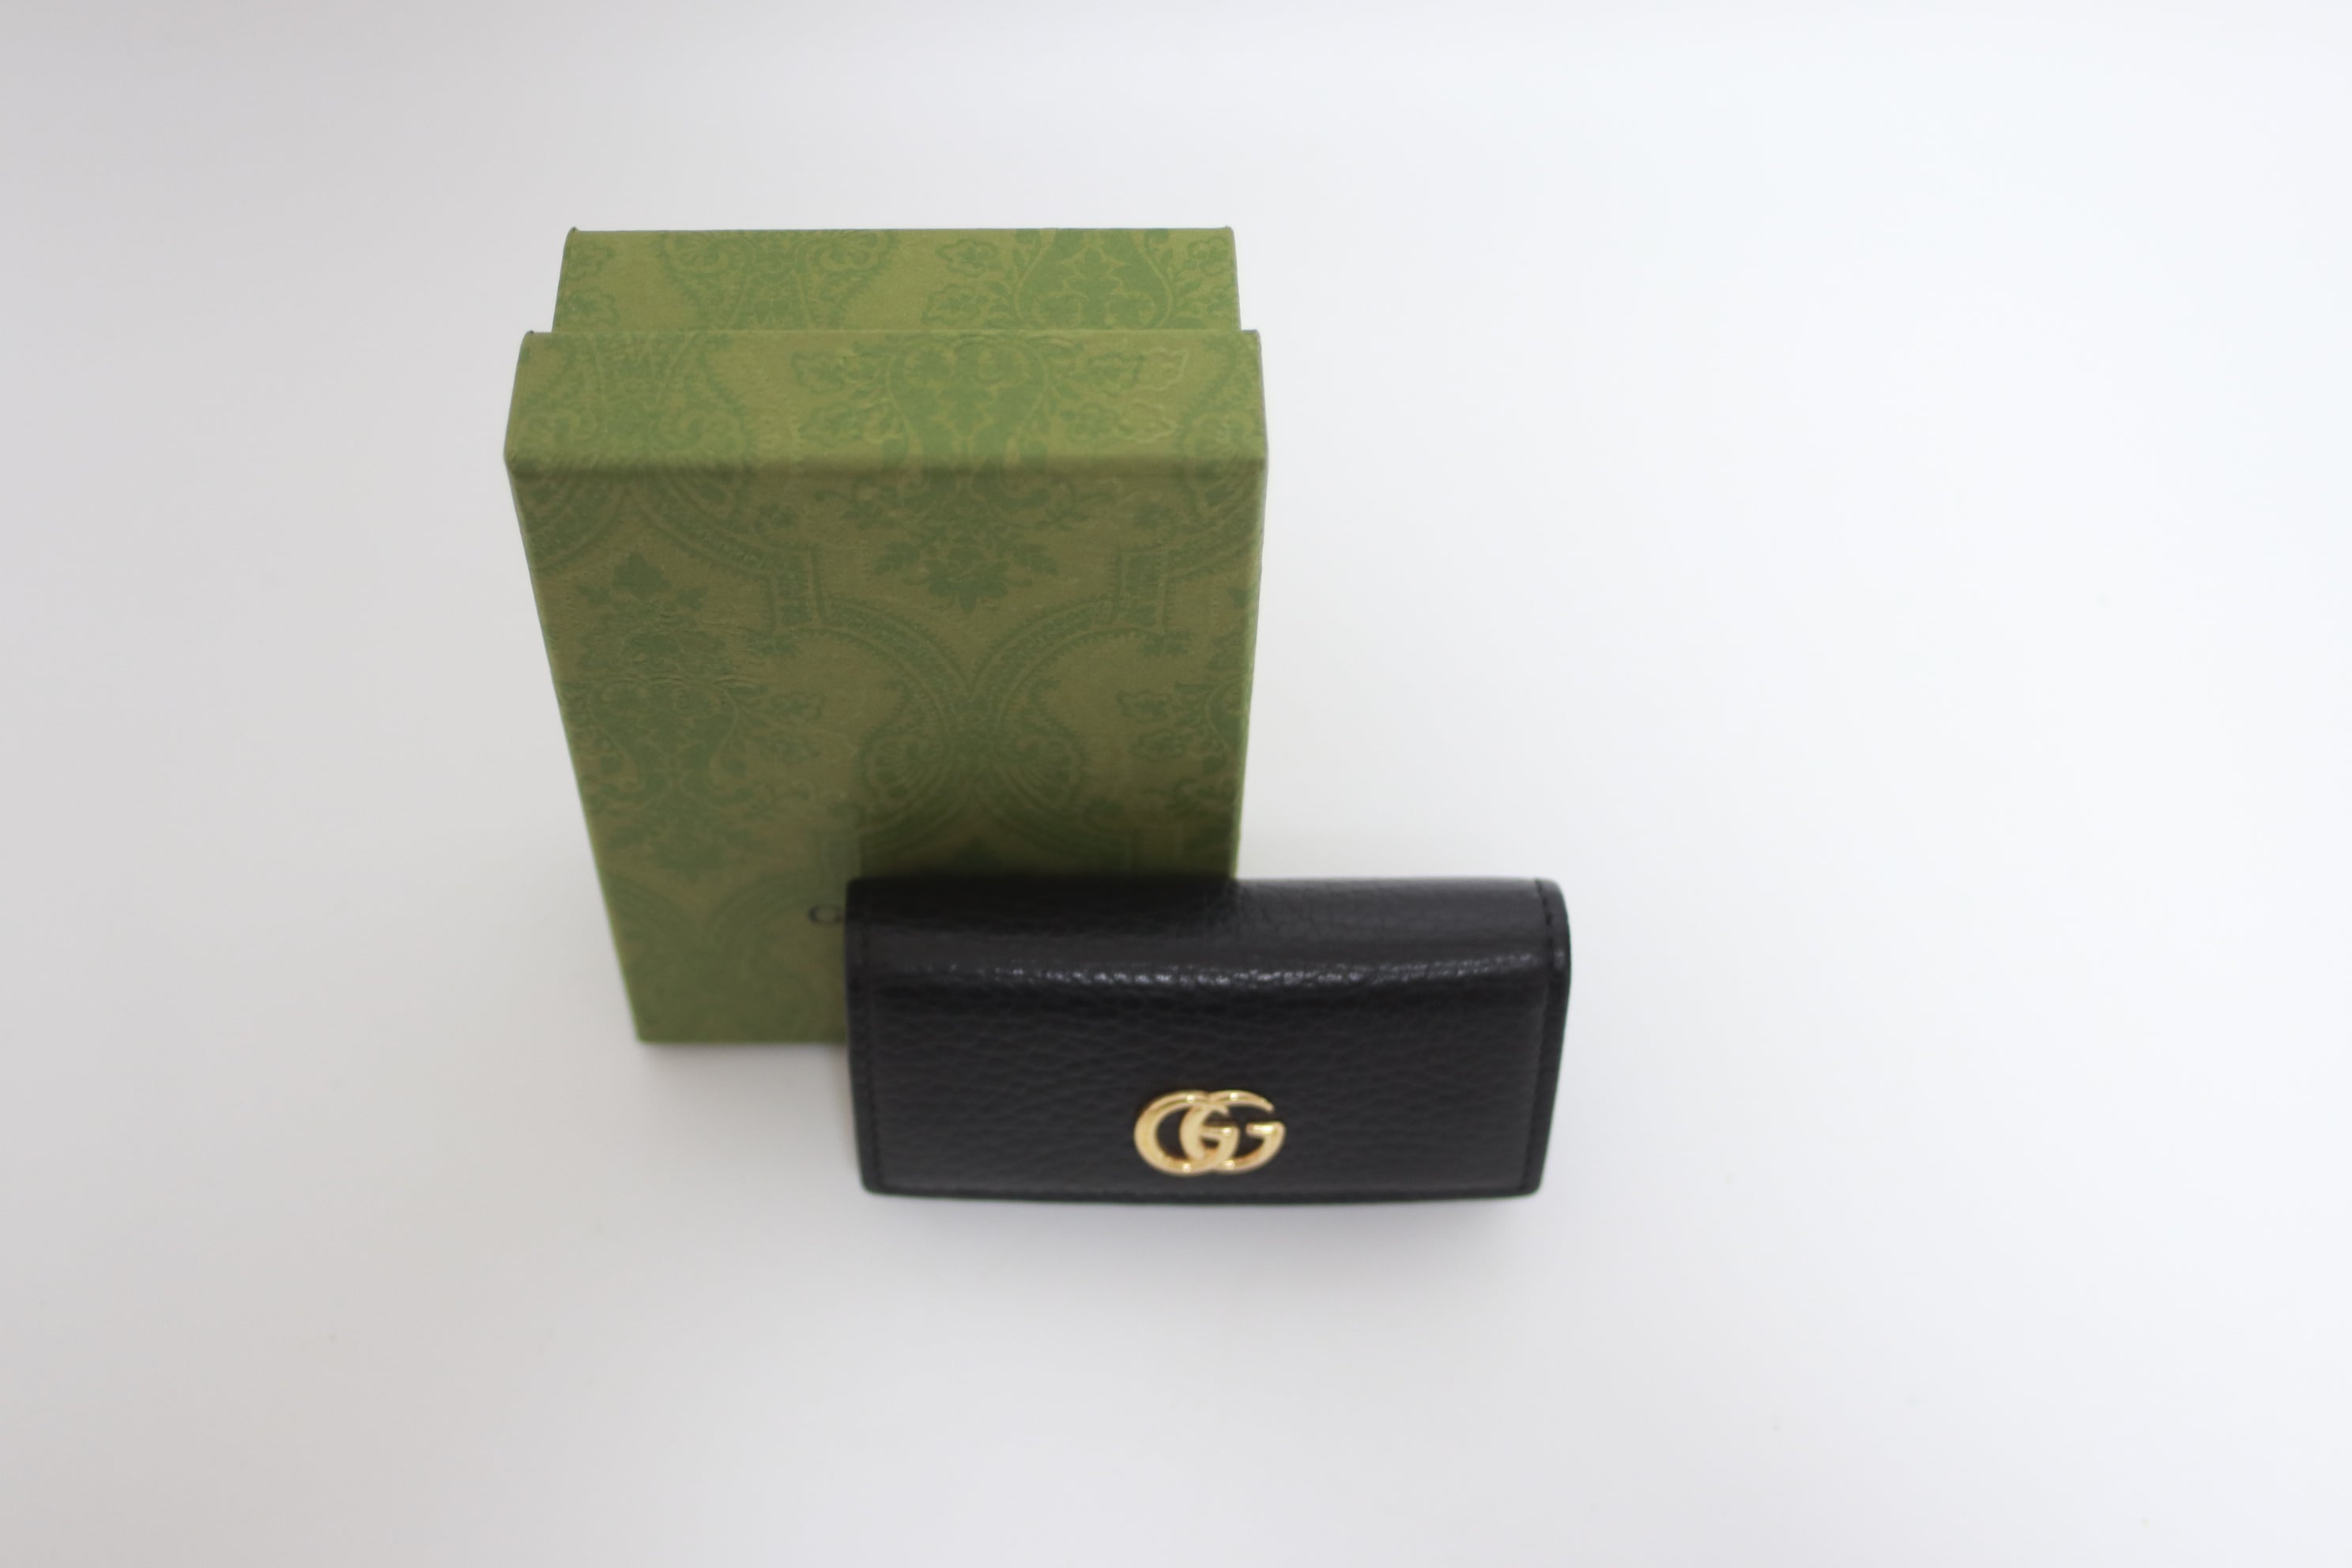 Gucci Marmont Key Case Used (8026)